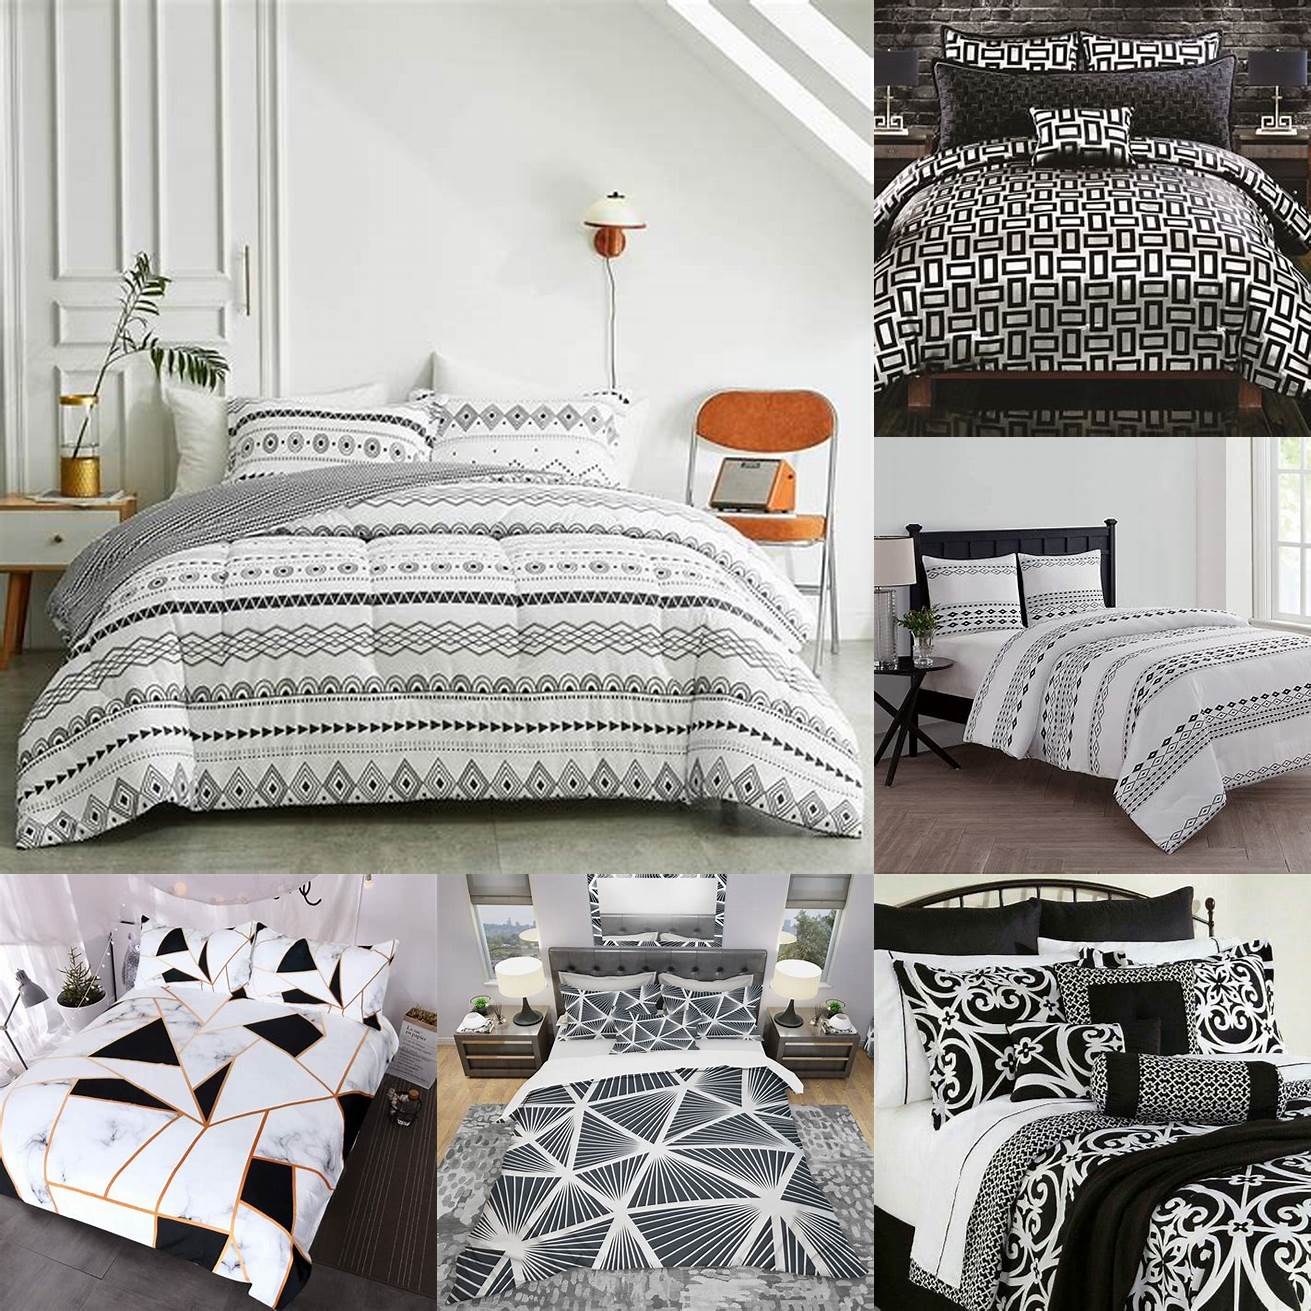 Black and white bedding with a geometric pattern